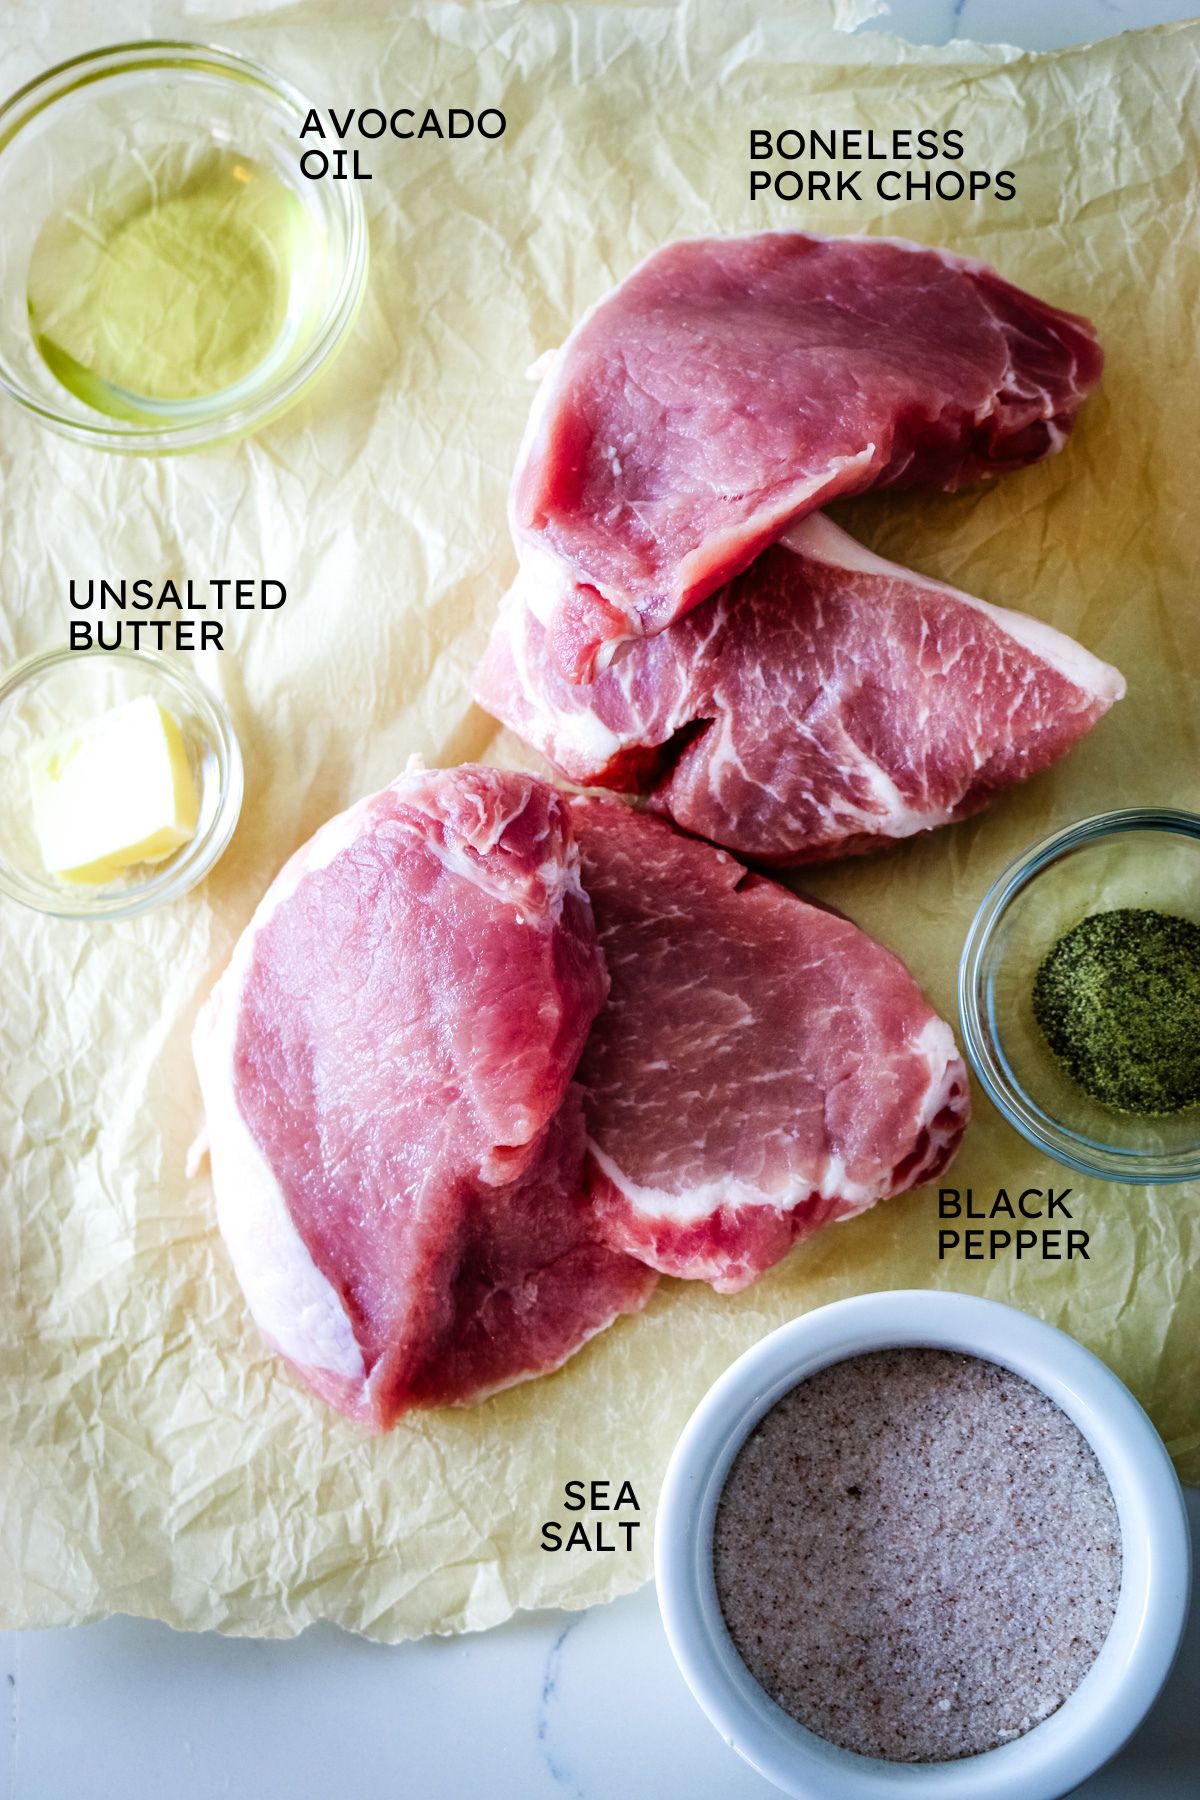 ingredients spread out on parchment paper, pork chops, oil, butter, salt and pepper.